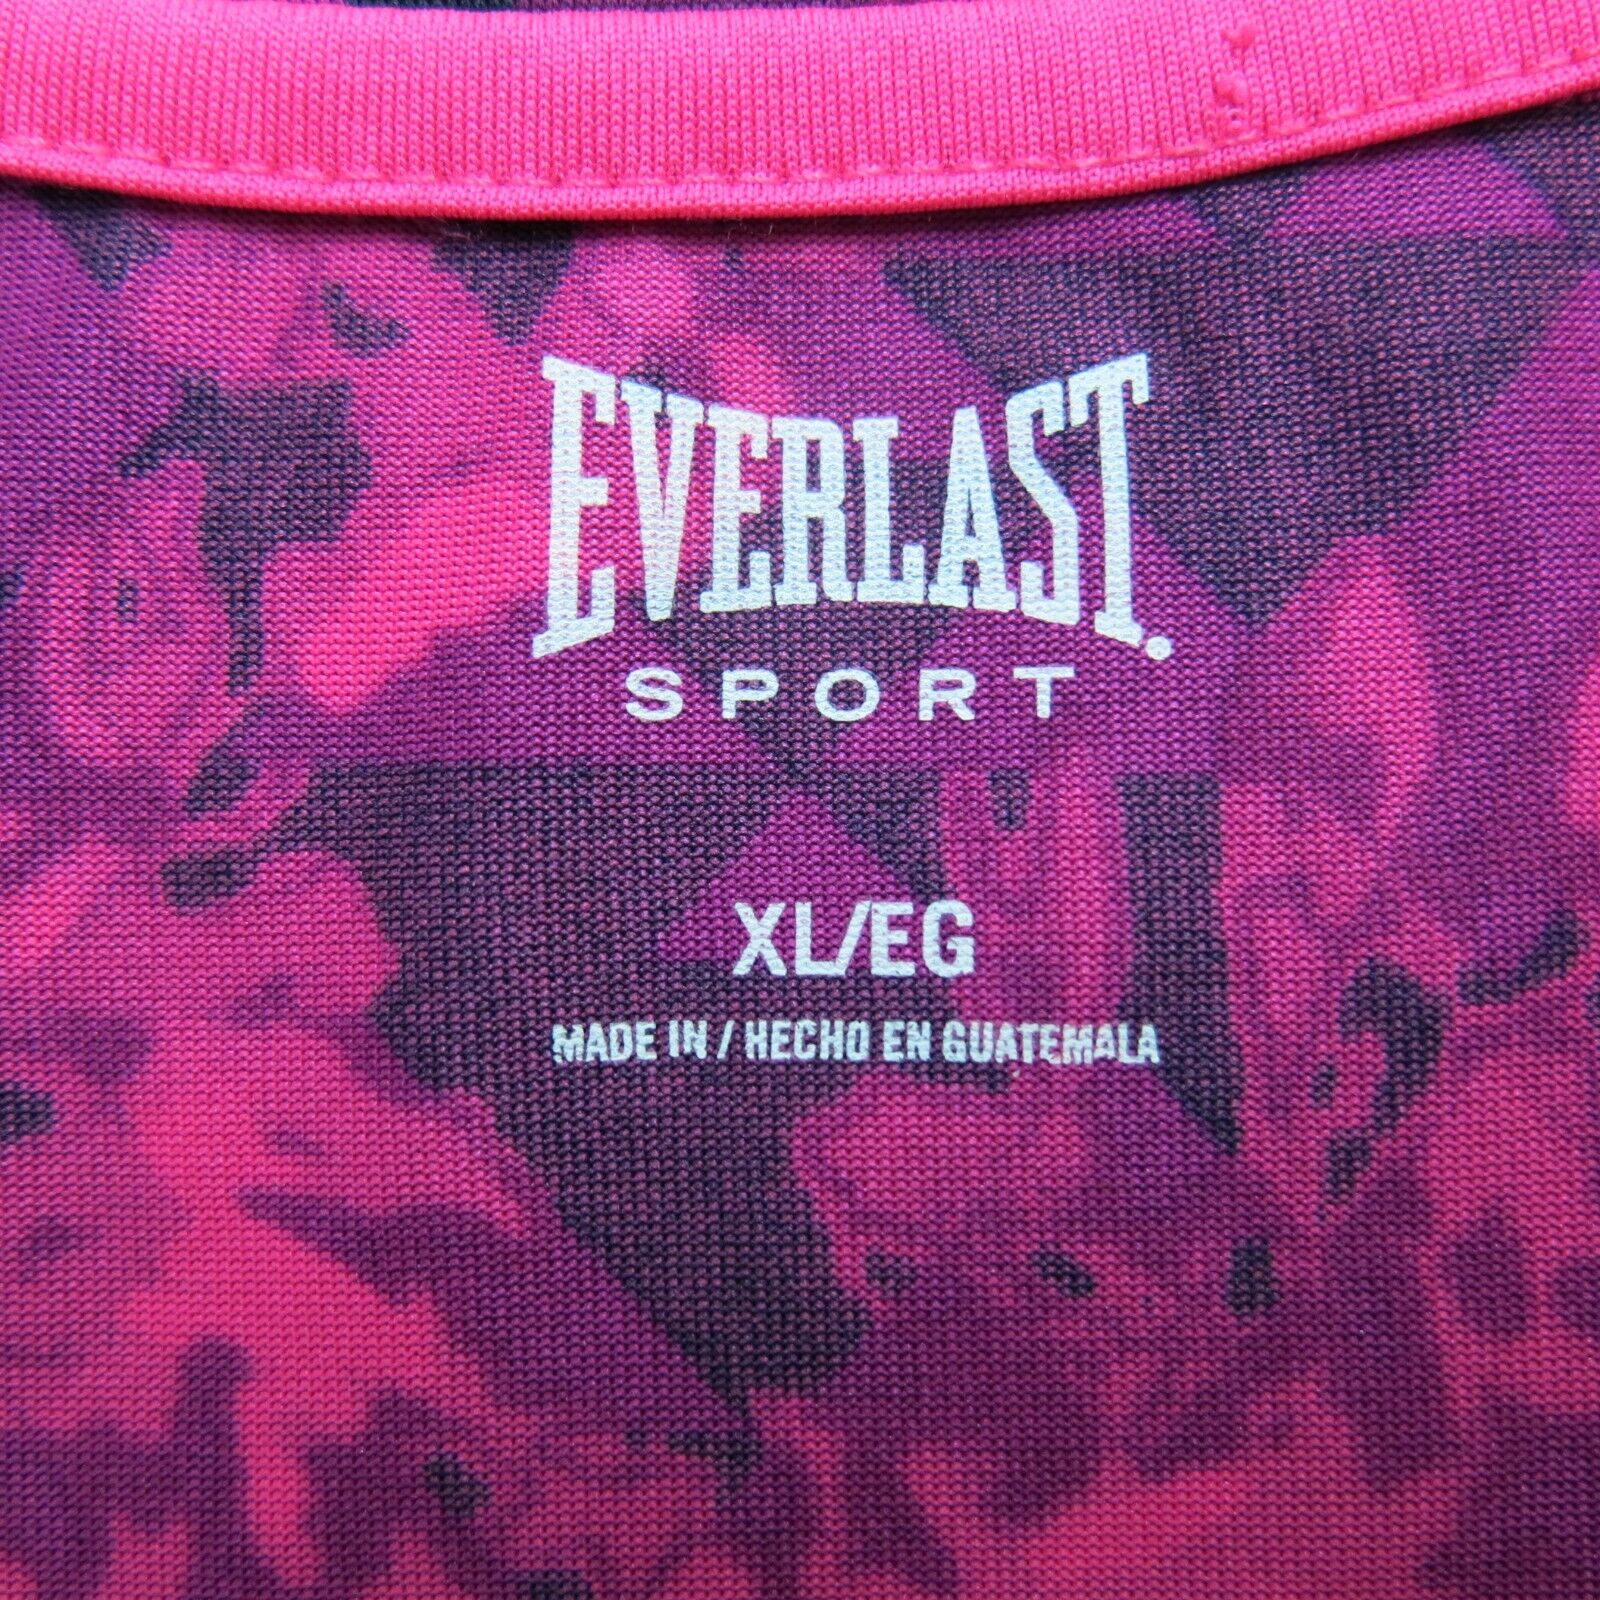 LADIES’ EVERLAST ATHLETIC SHORTS, PINK, SIZE SMALL